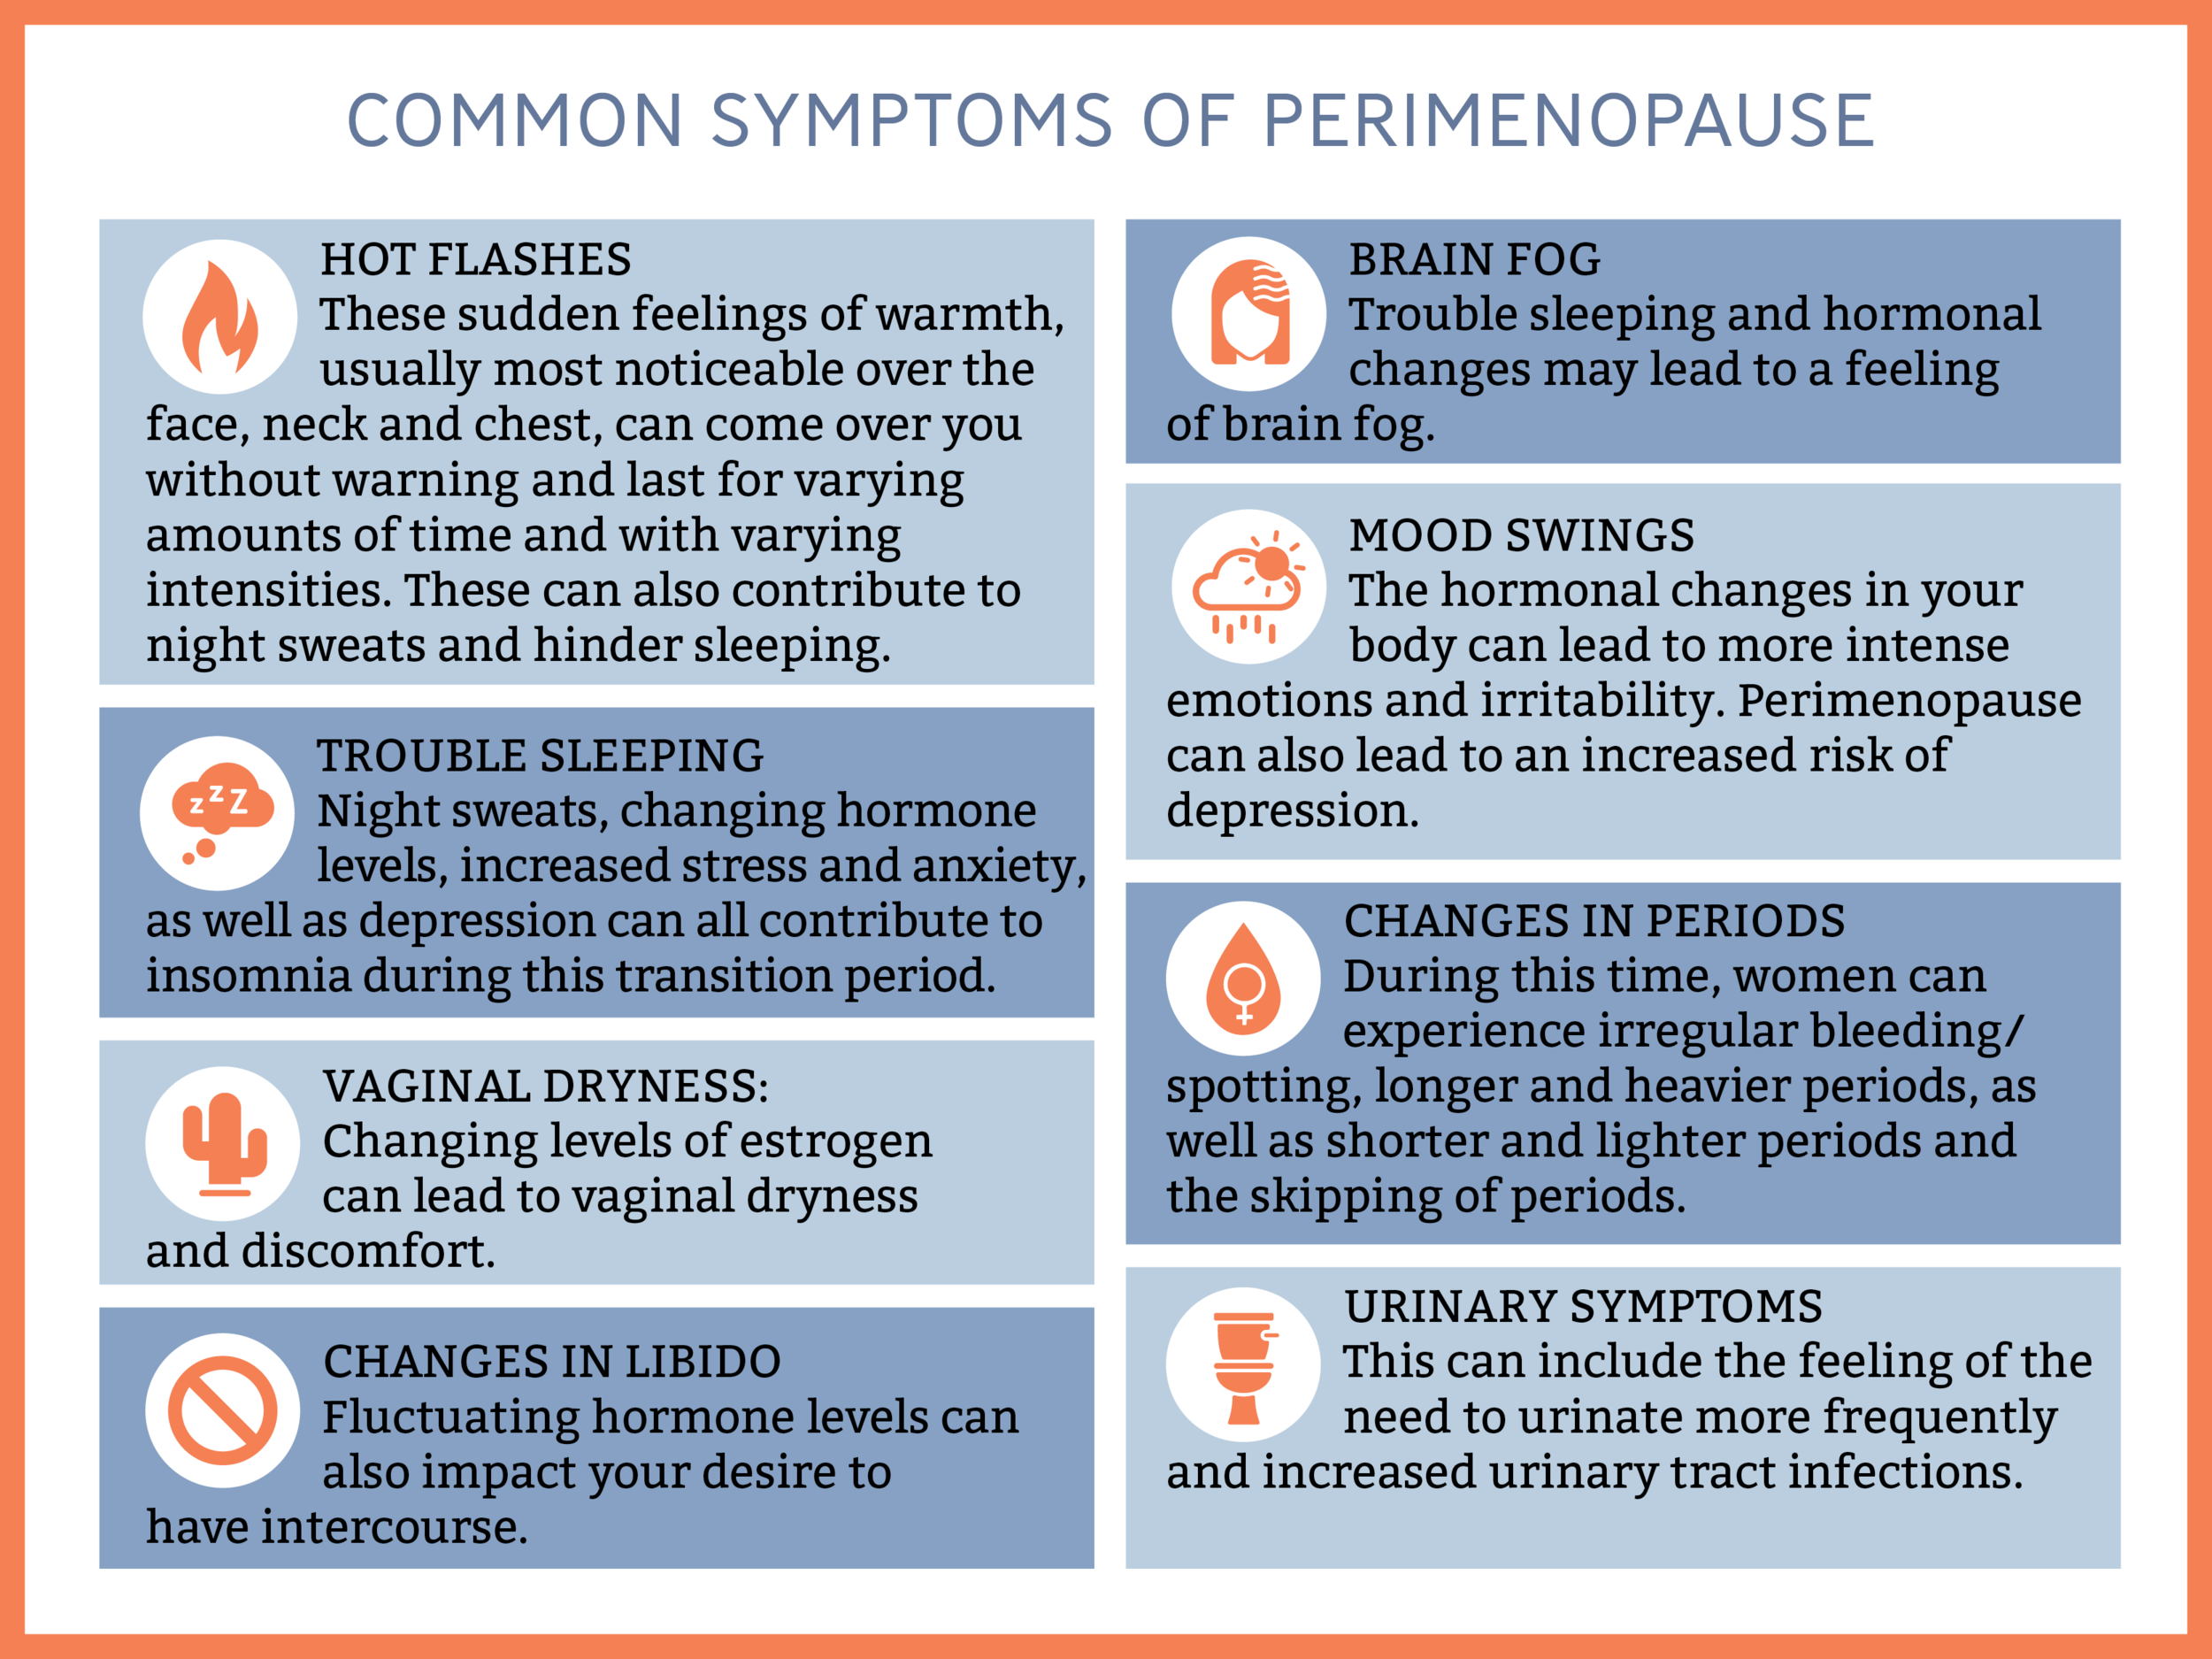 What are the symptoms of going through menopause